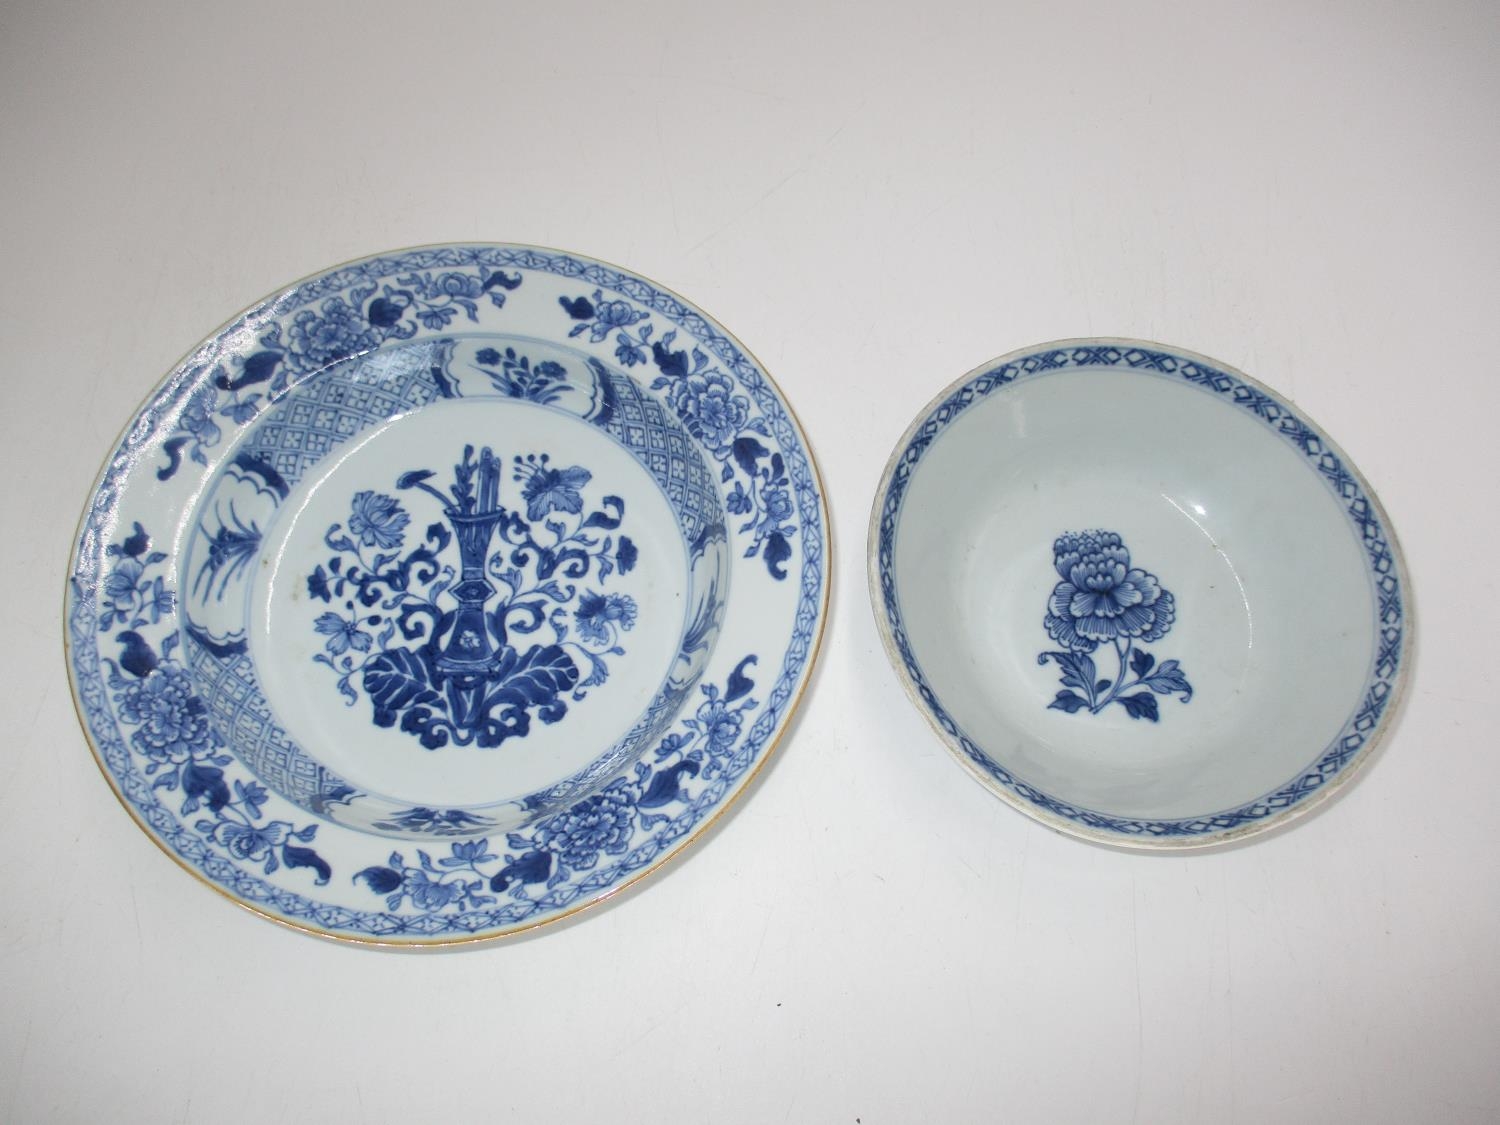 Two Late 18th/Early 19th Century Chinese Export Porcelain Blue and White Dishes, 22 and 16cm